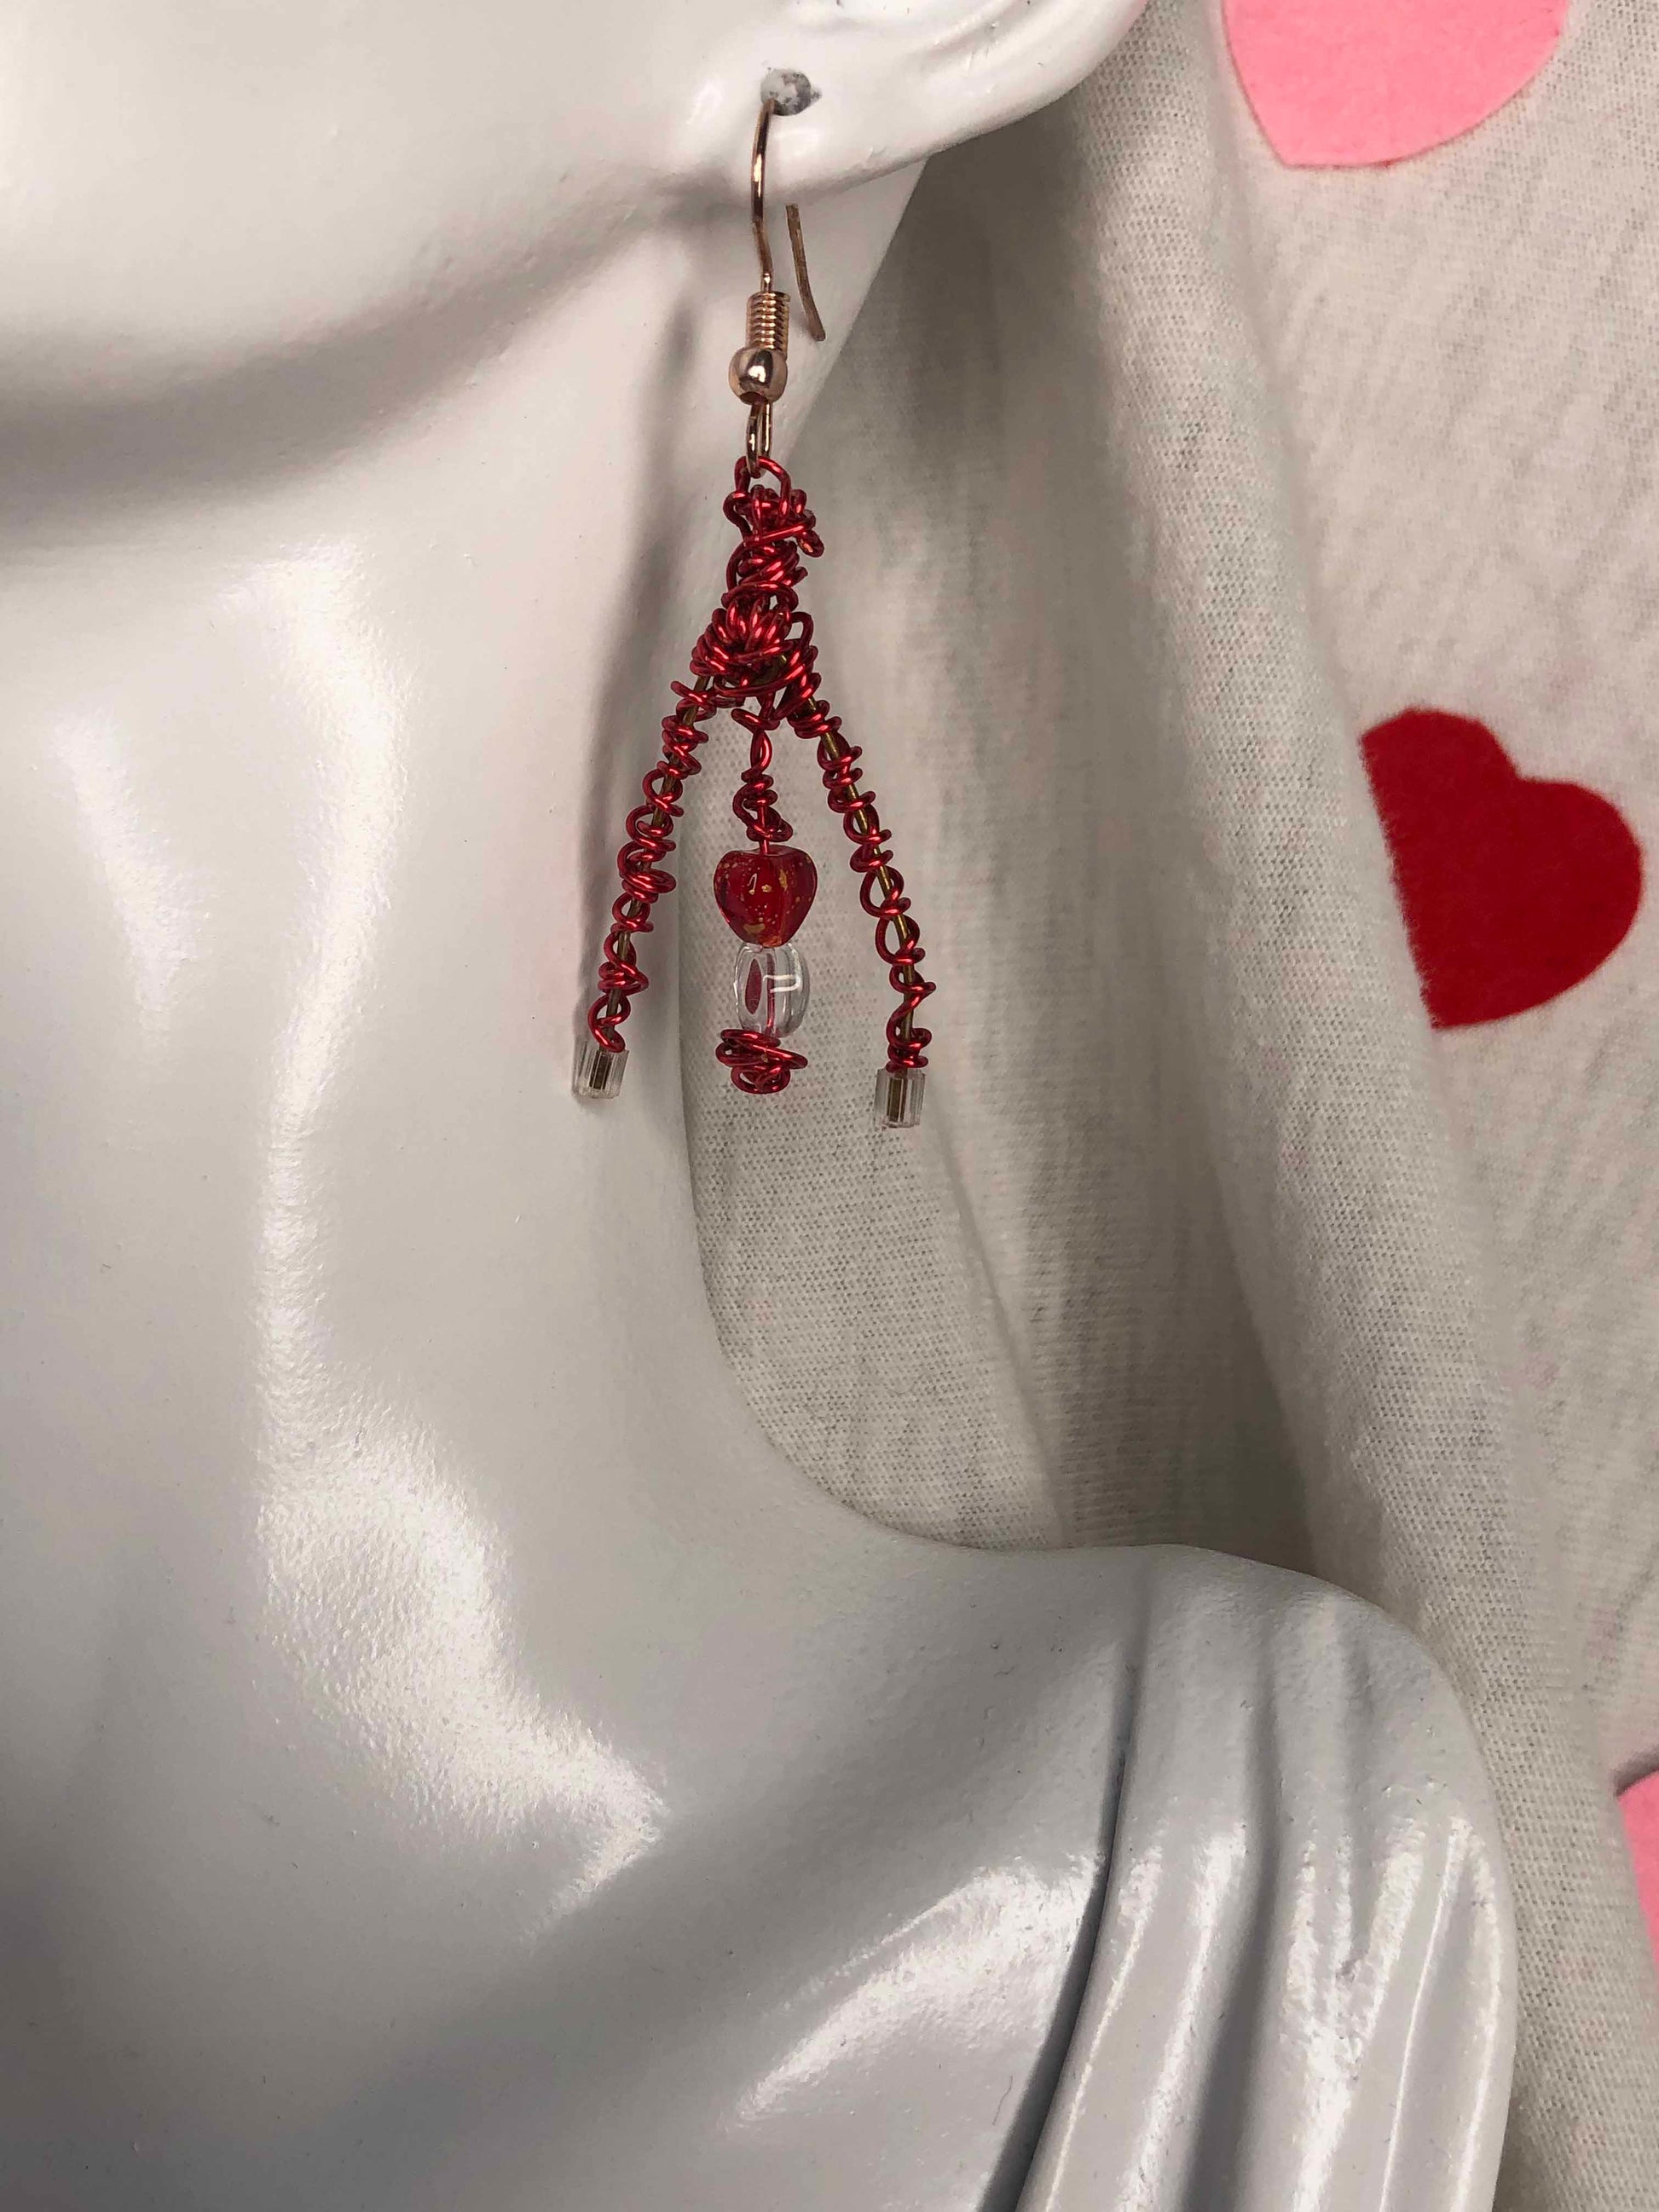 A pair of mismatched asymmetrical earrings wire wrapped using red and gold wires with clear & red heart beads, and a red crystal bead.